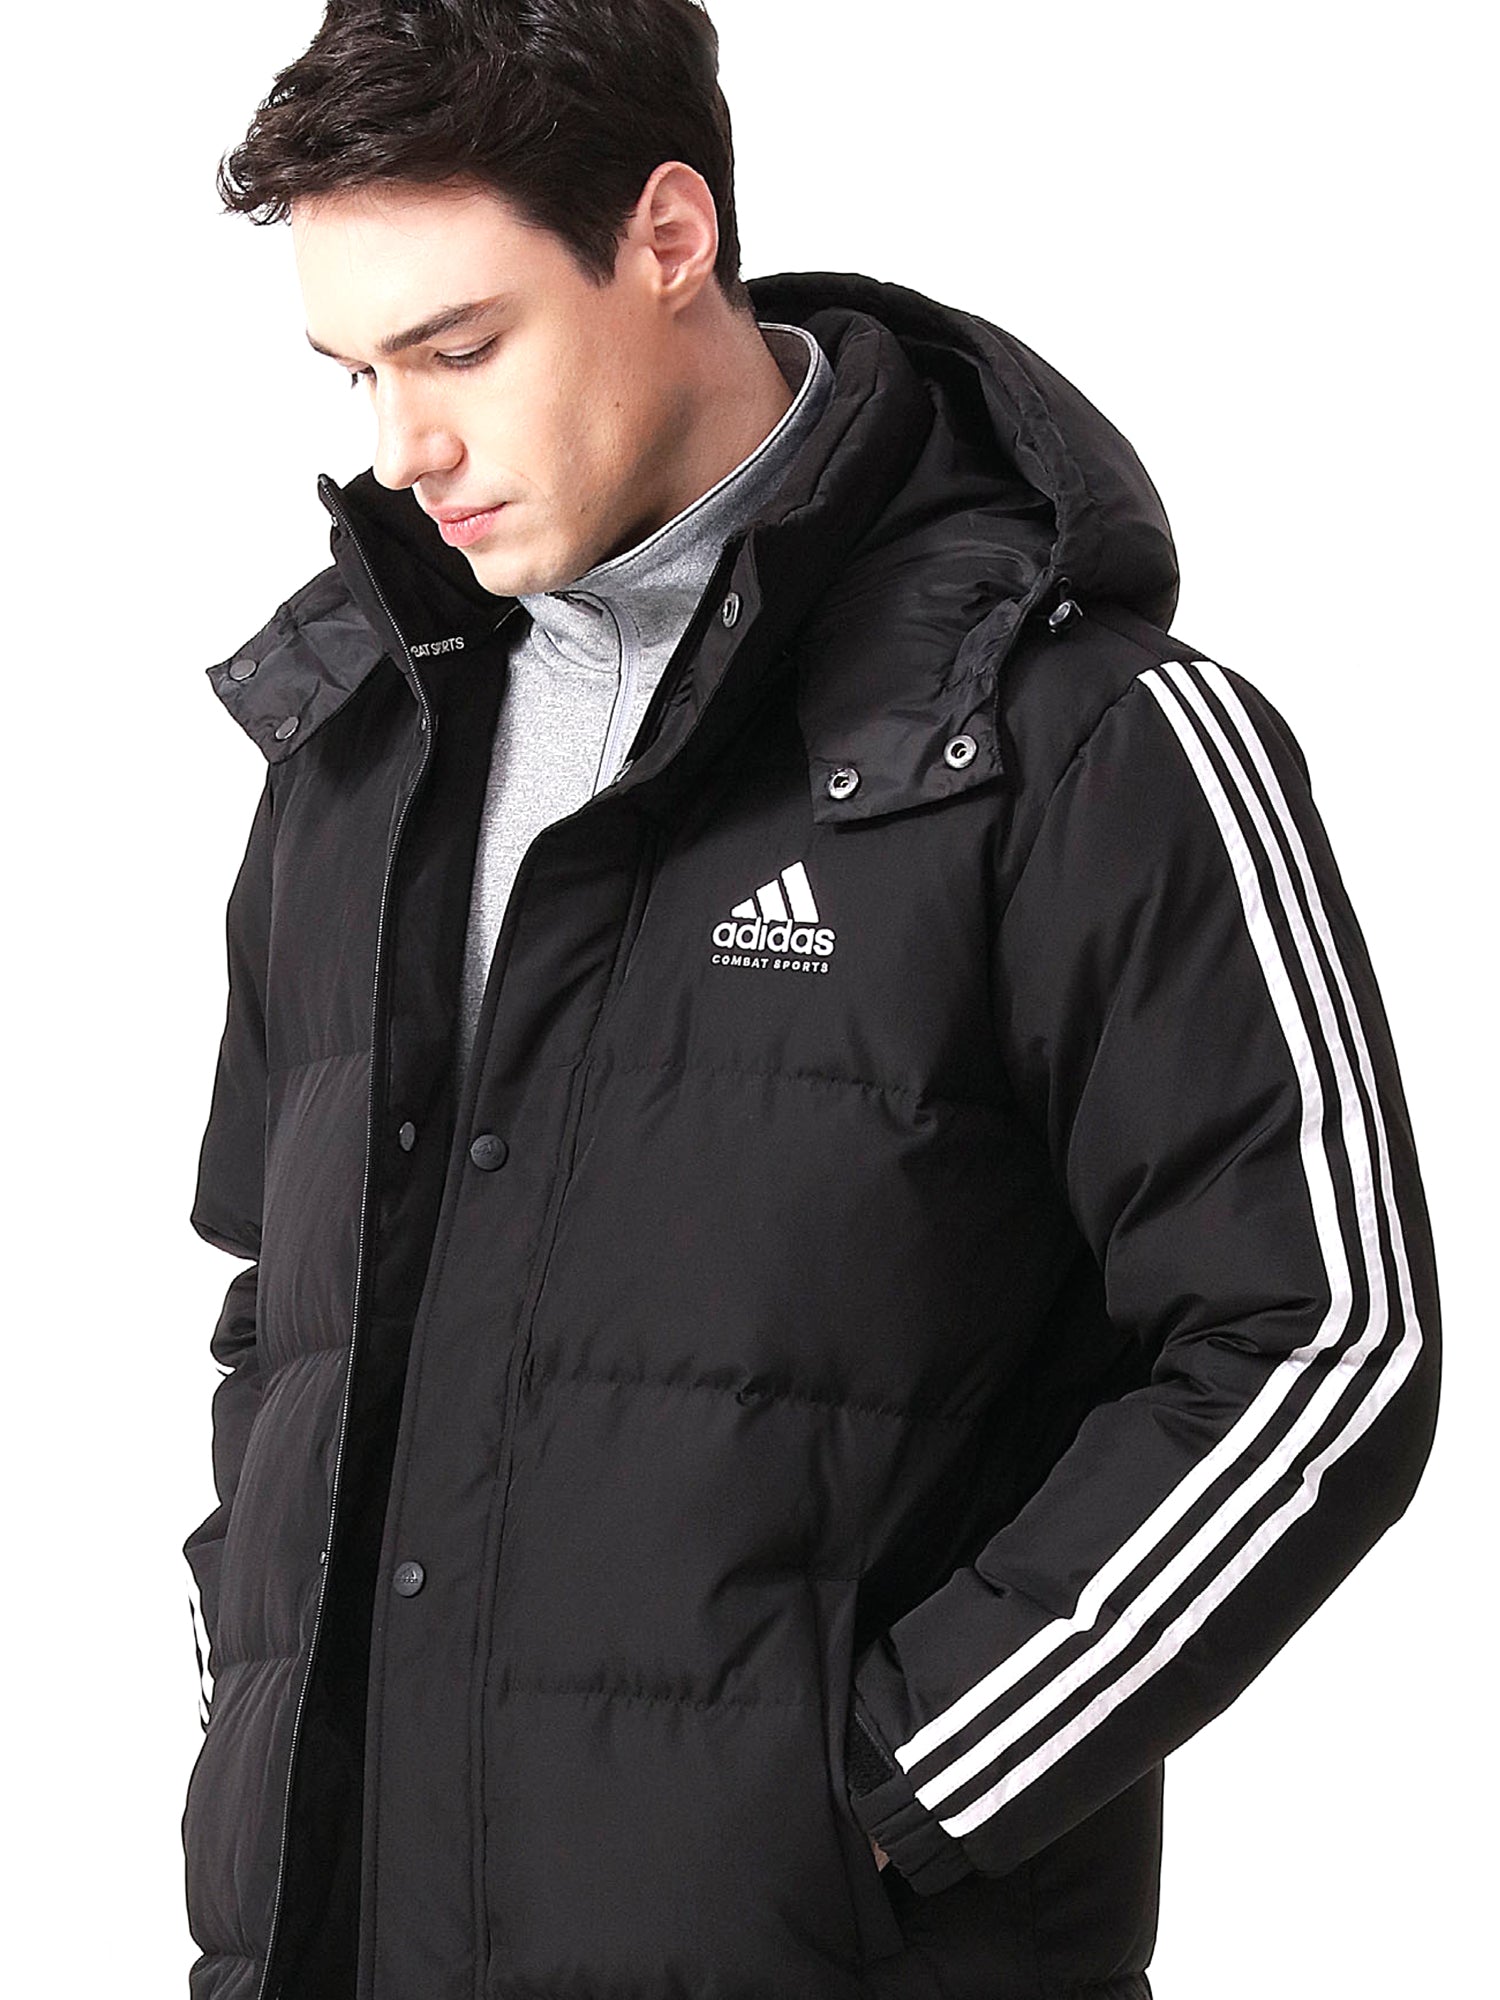 AAU Embroidered adidas Combat Sports Winter Padded Parka Jacket – All American Martial Arts